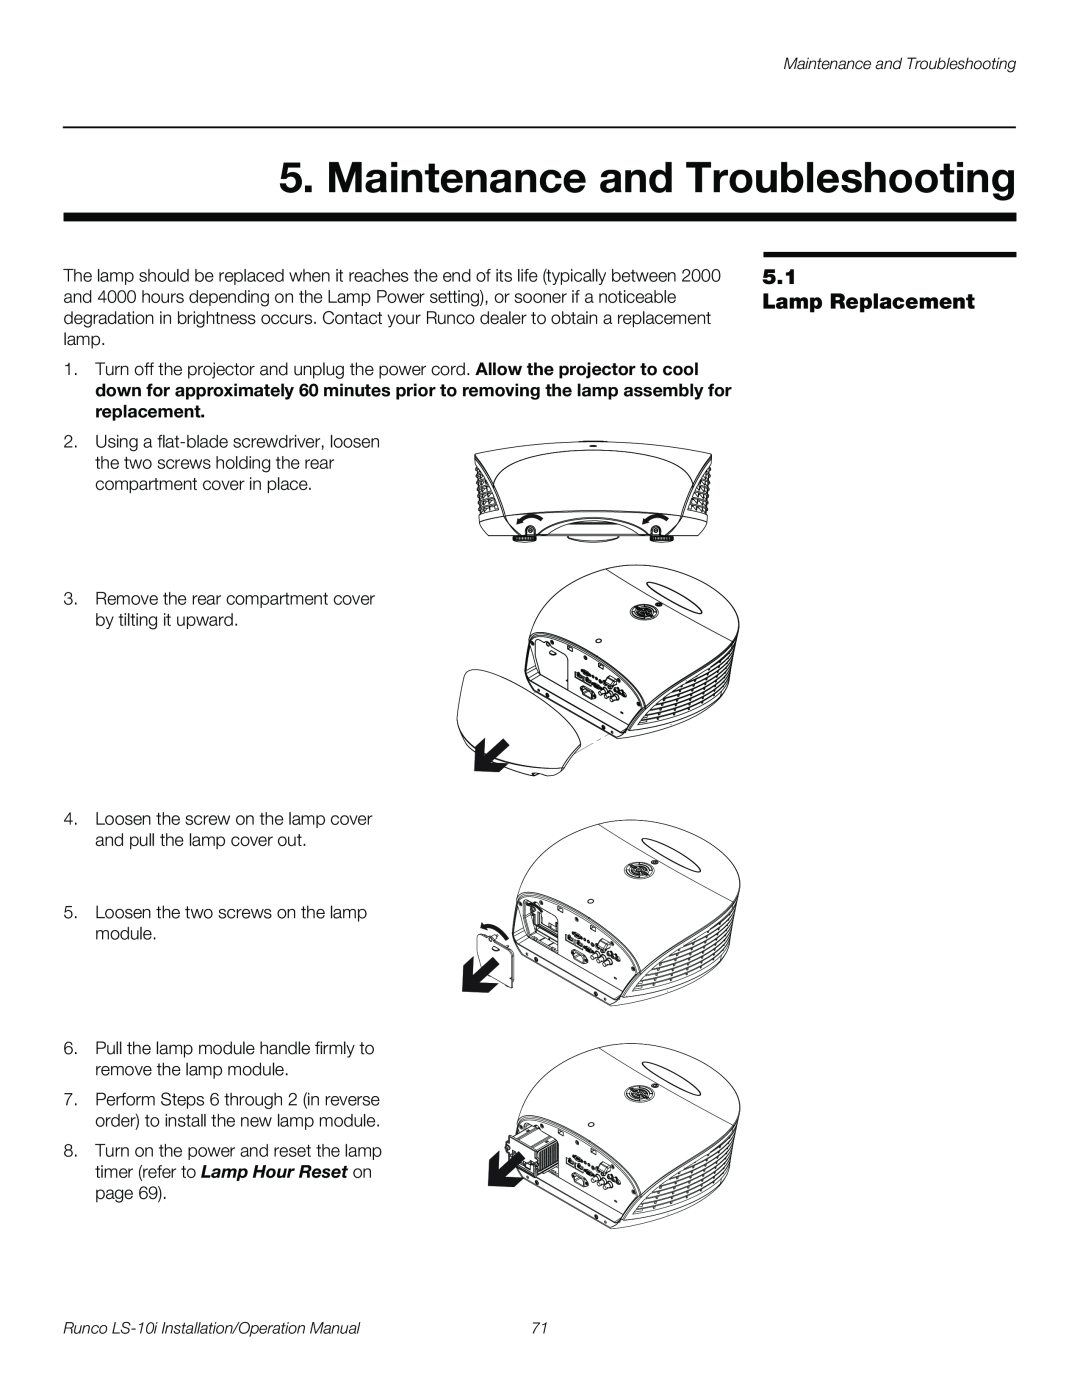 Runco LS-10I operation manual Maintenance and Troubleshooting, Lamp Replacement 